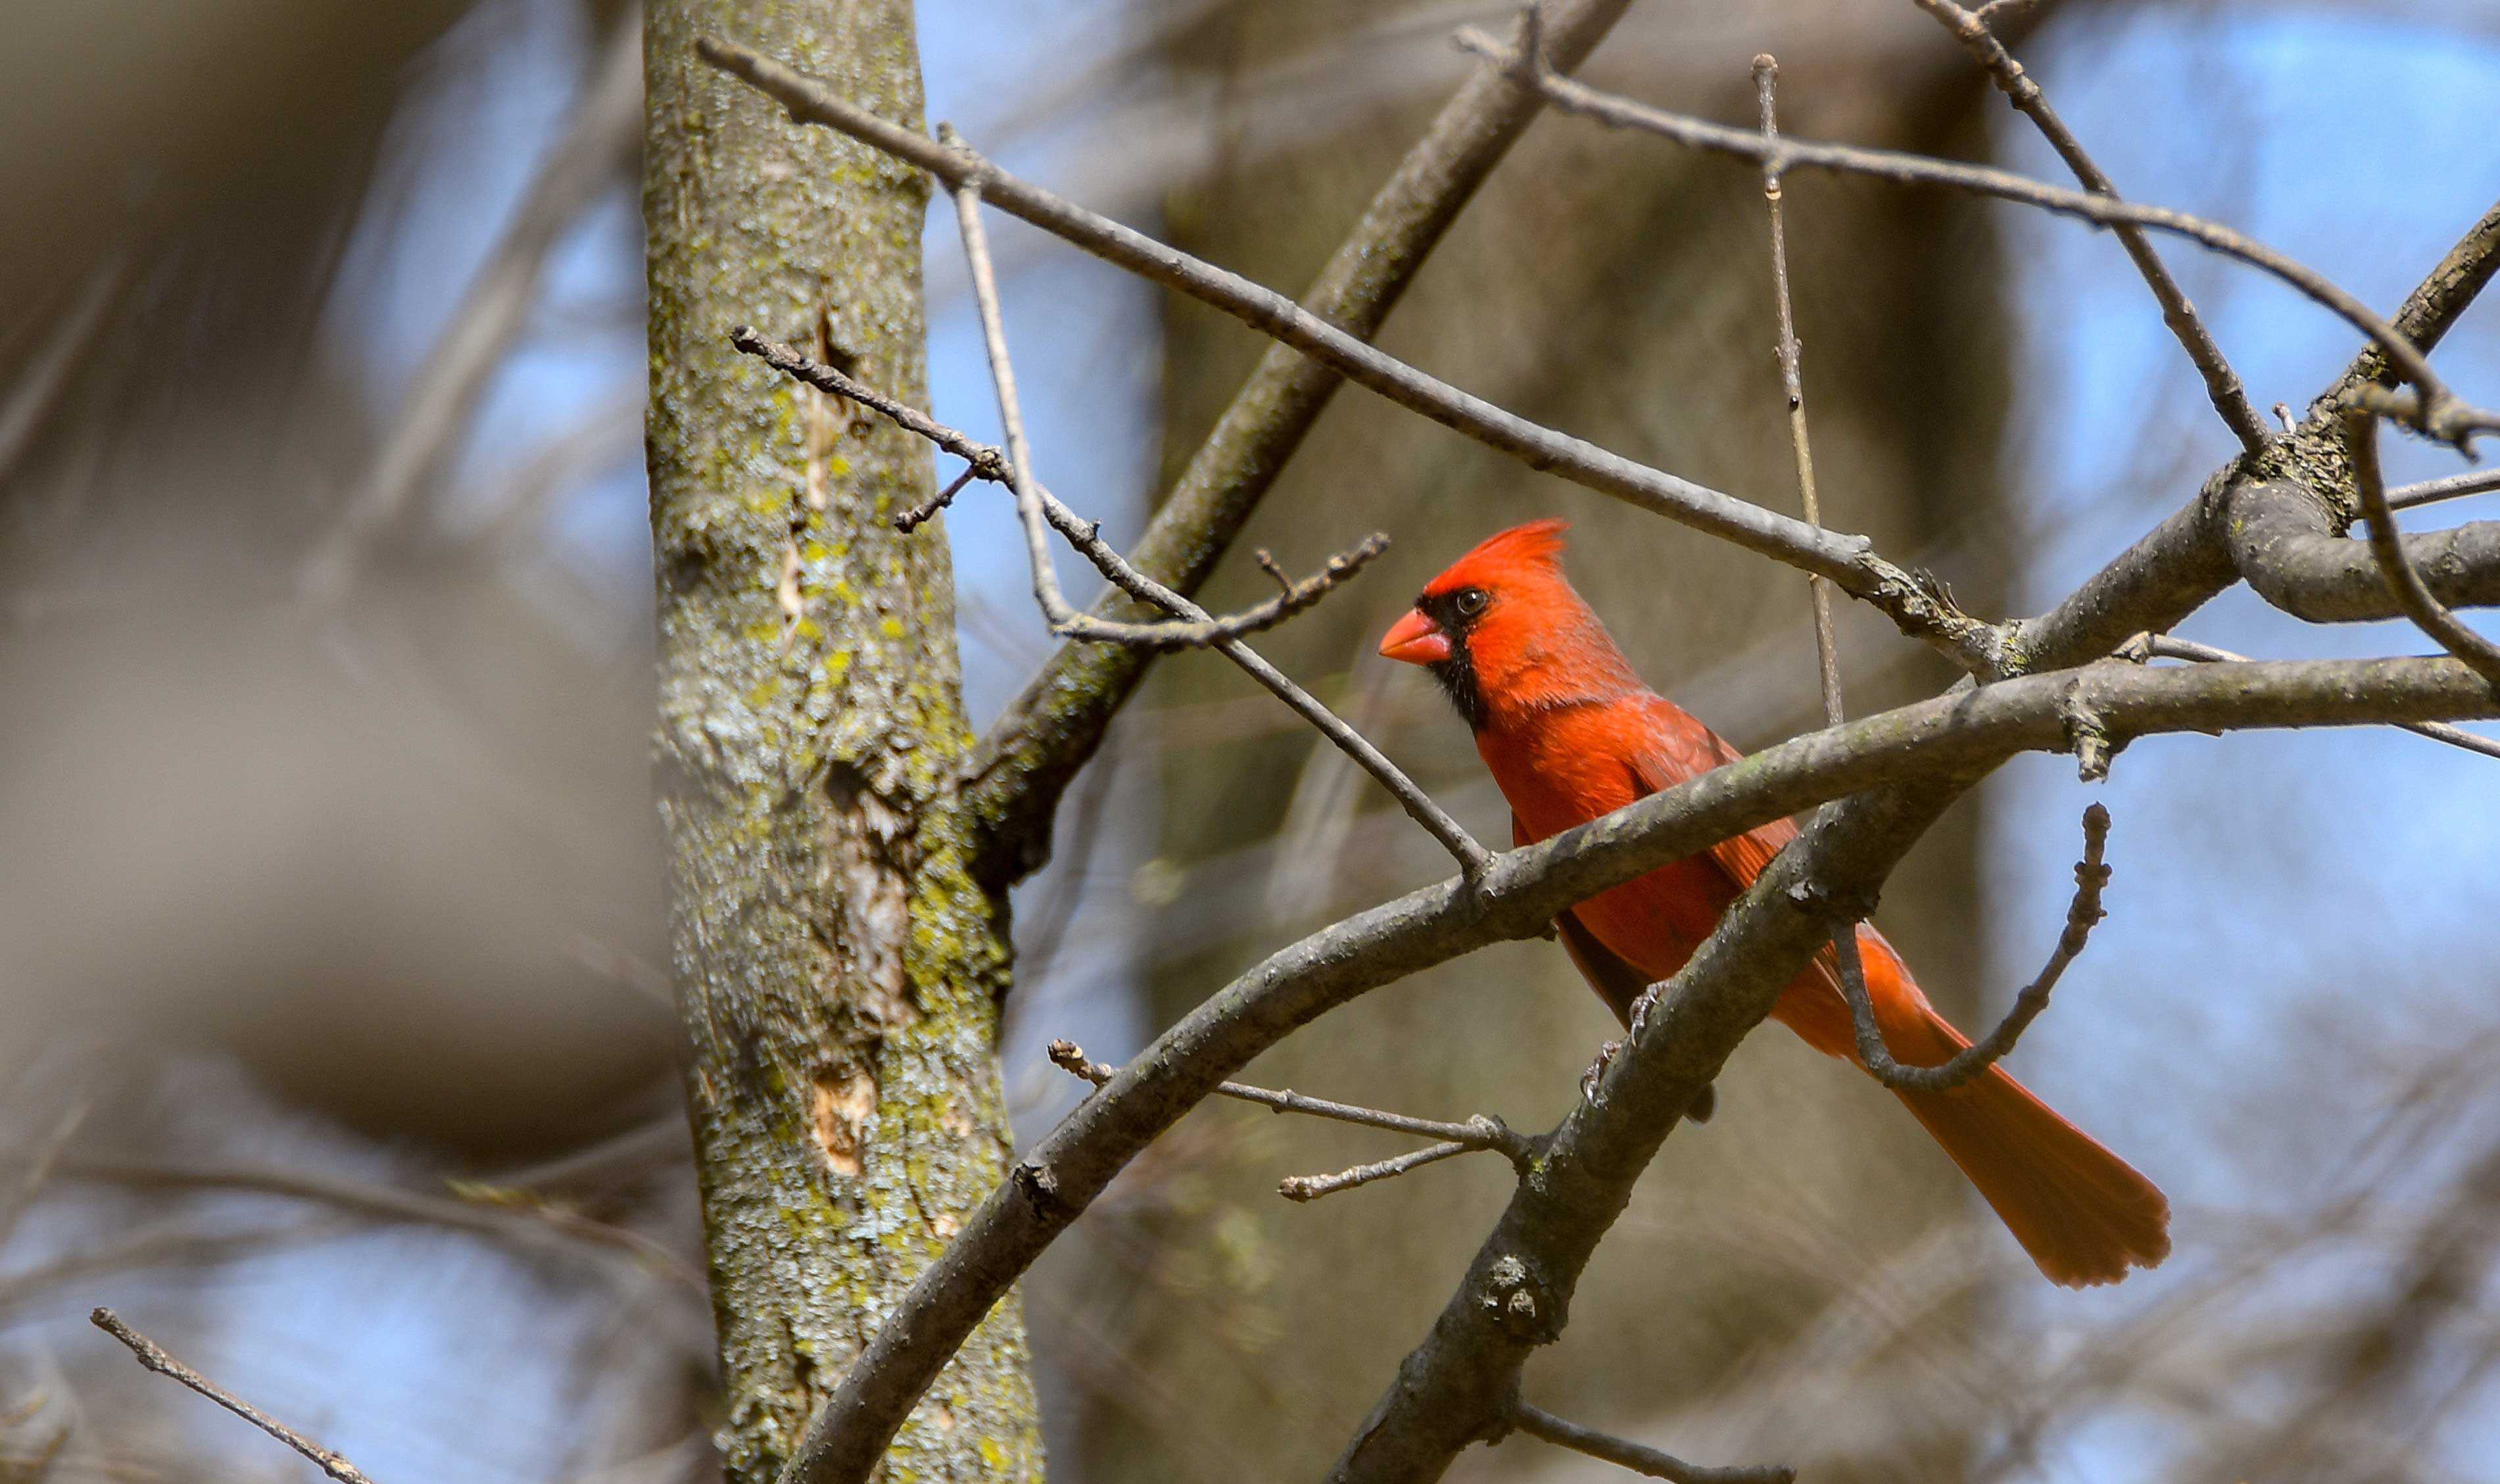 A northern cardinal on a branch.